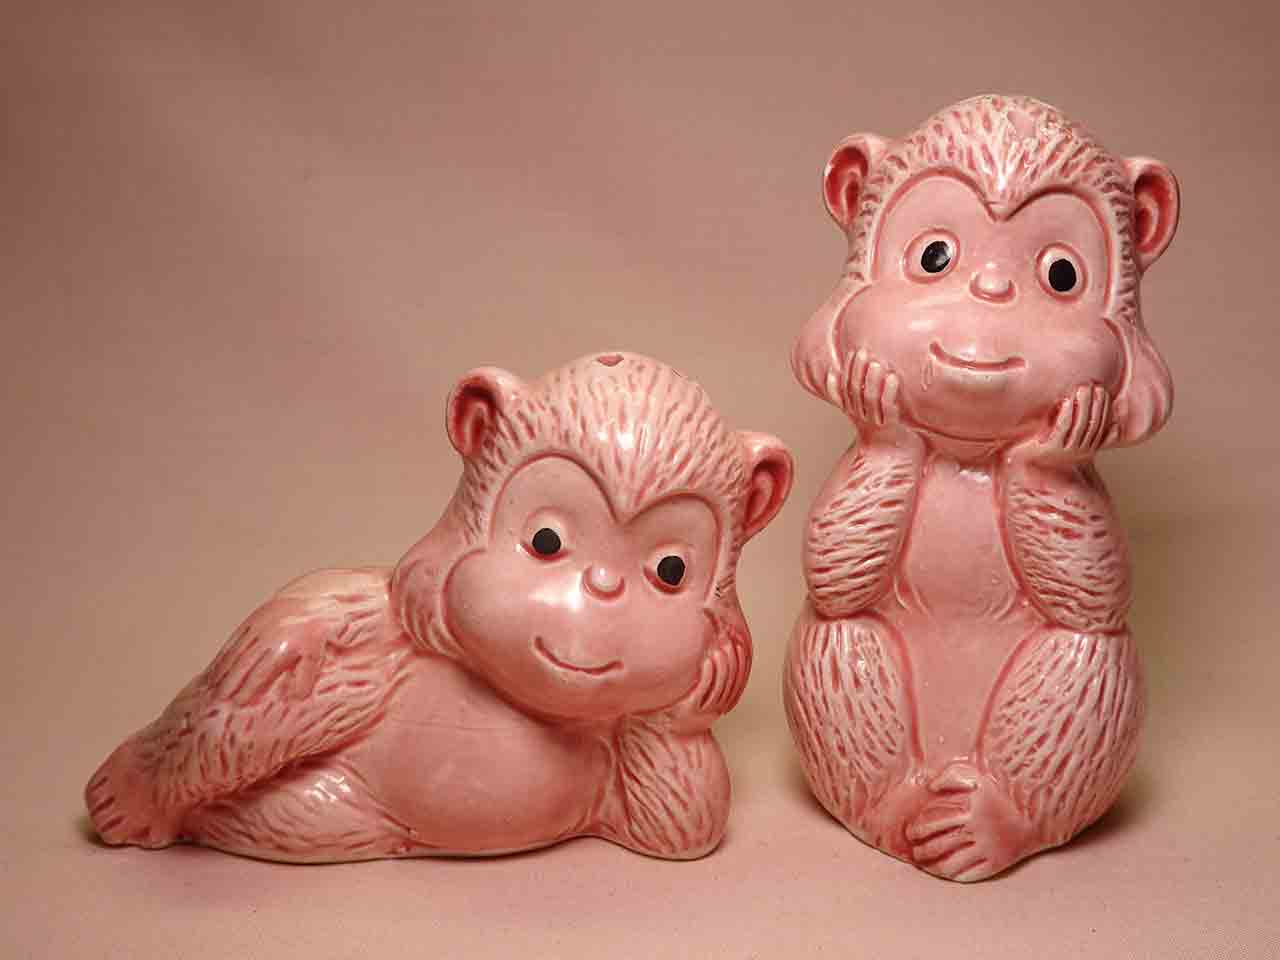 Colorful Animals with One Lying Down salt and pepper shakers series - monkeys